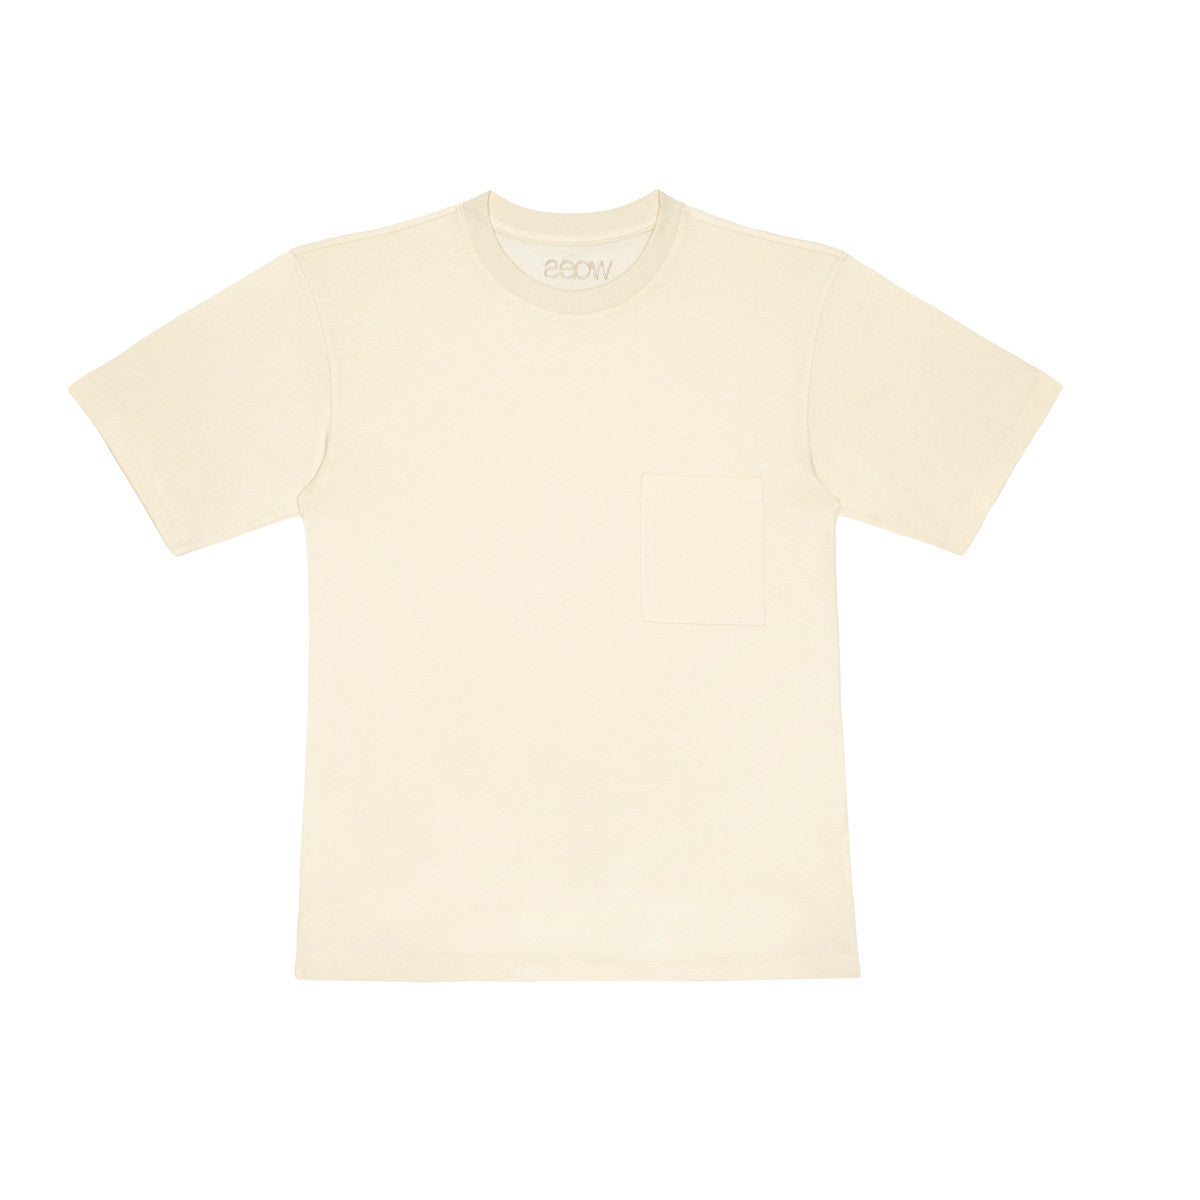 Our Little Hedonist round neck t-shirt in beige is a populair essential. It has a relaxed-fit, has a pocket on the chest and is made from our premium organic cotton. The neckline is round and fitted, with short sleeves. It has bit oversized look.